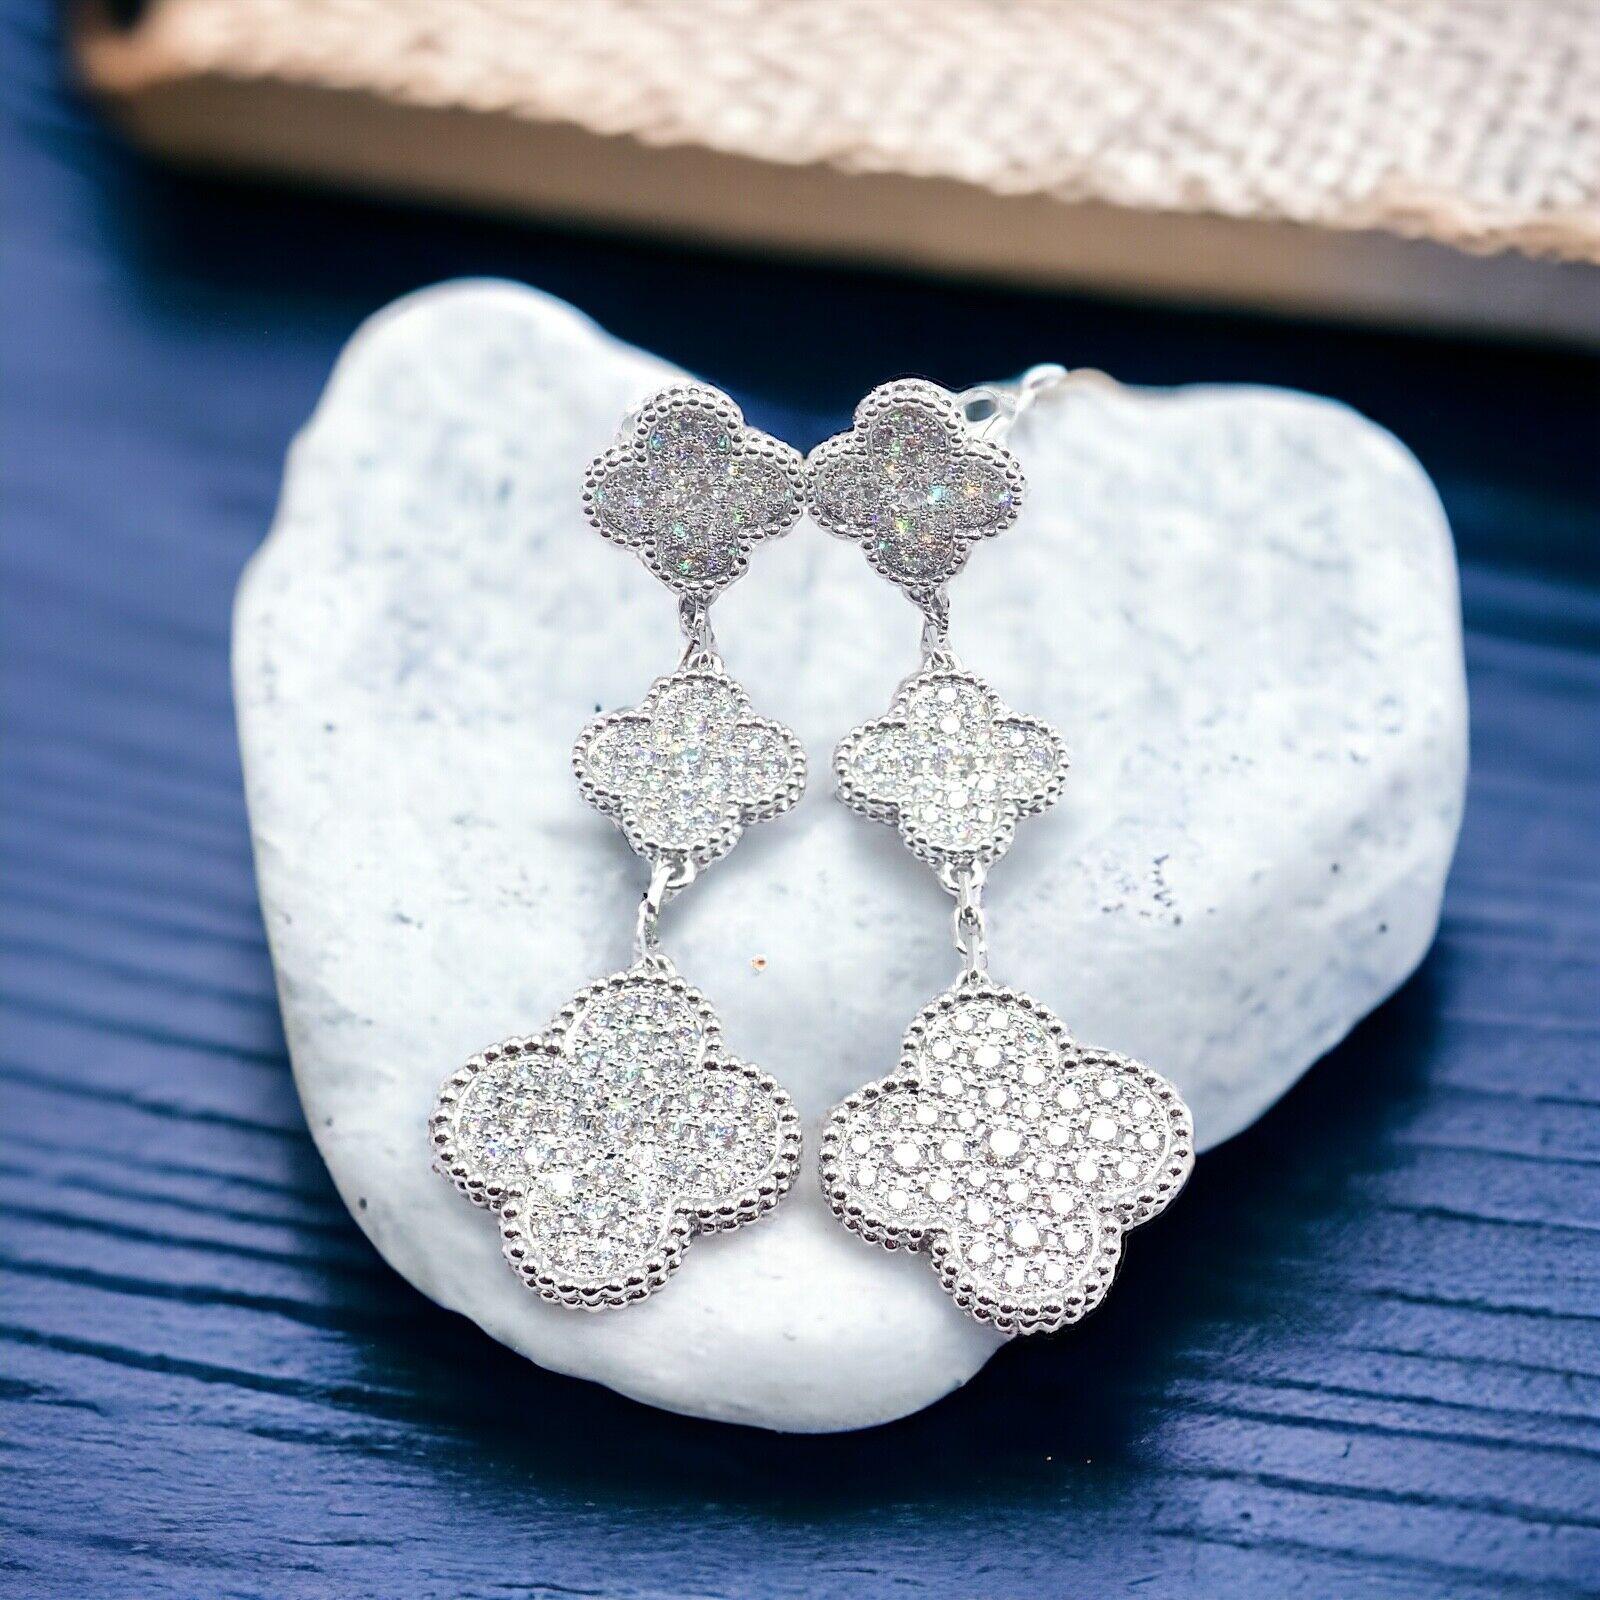 18k White Gold Diamond Magic Alhambra 3 Motifs Long Earrings by Van Cleef & Arpels.
The Van Cleef & Arpels 18k White Gold Diamond Magic Alhambra 3 Motifs Earrings are an exquisite piece of luxury jewelry. 
Each earring features three clover-shaped